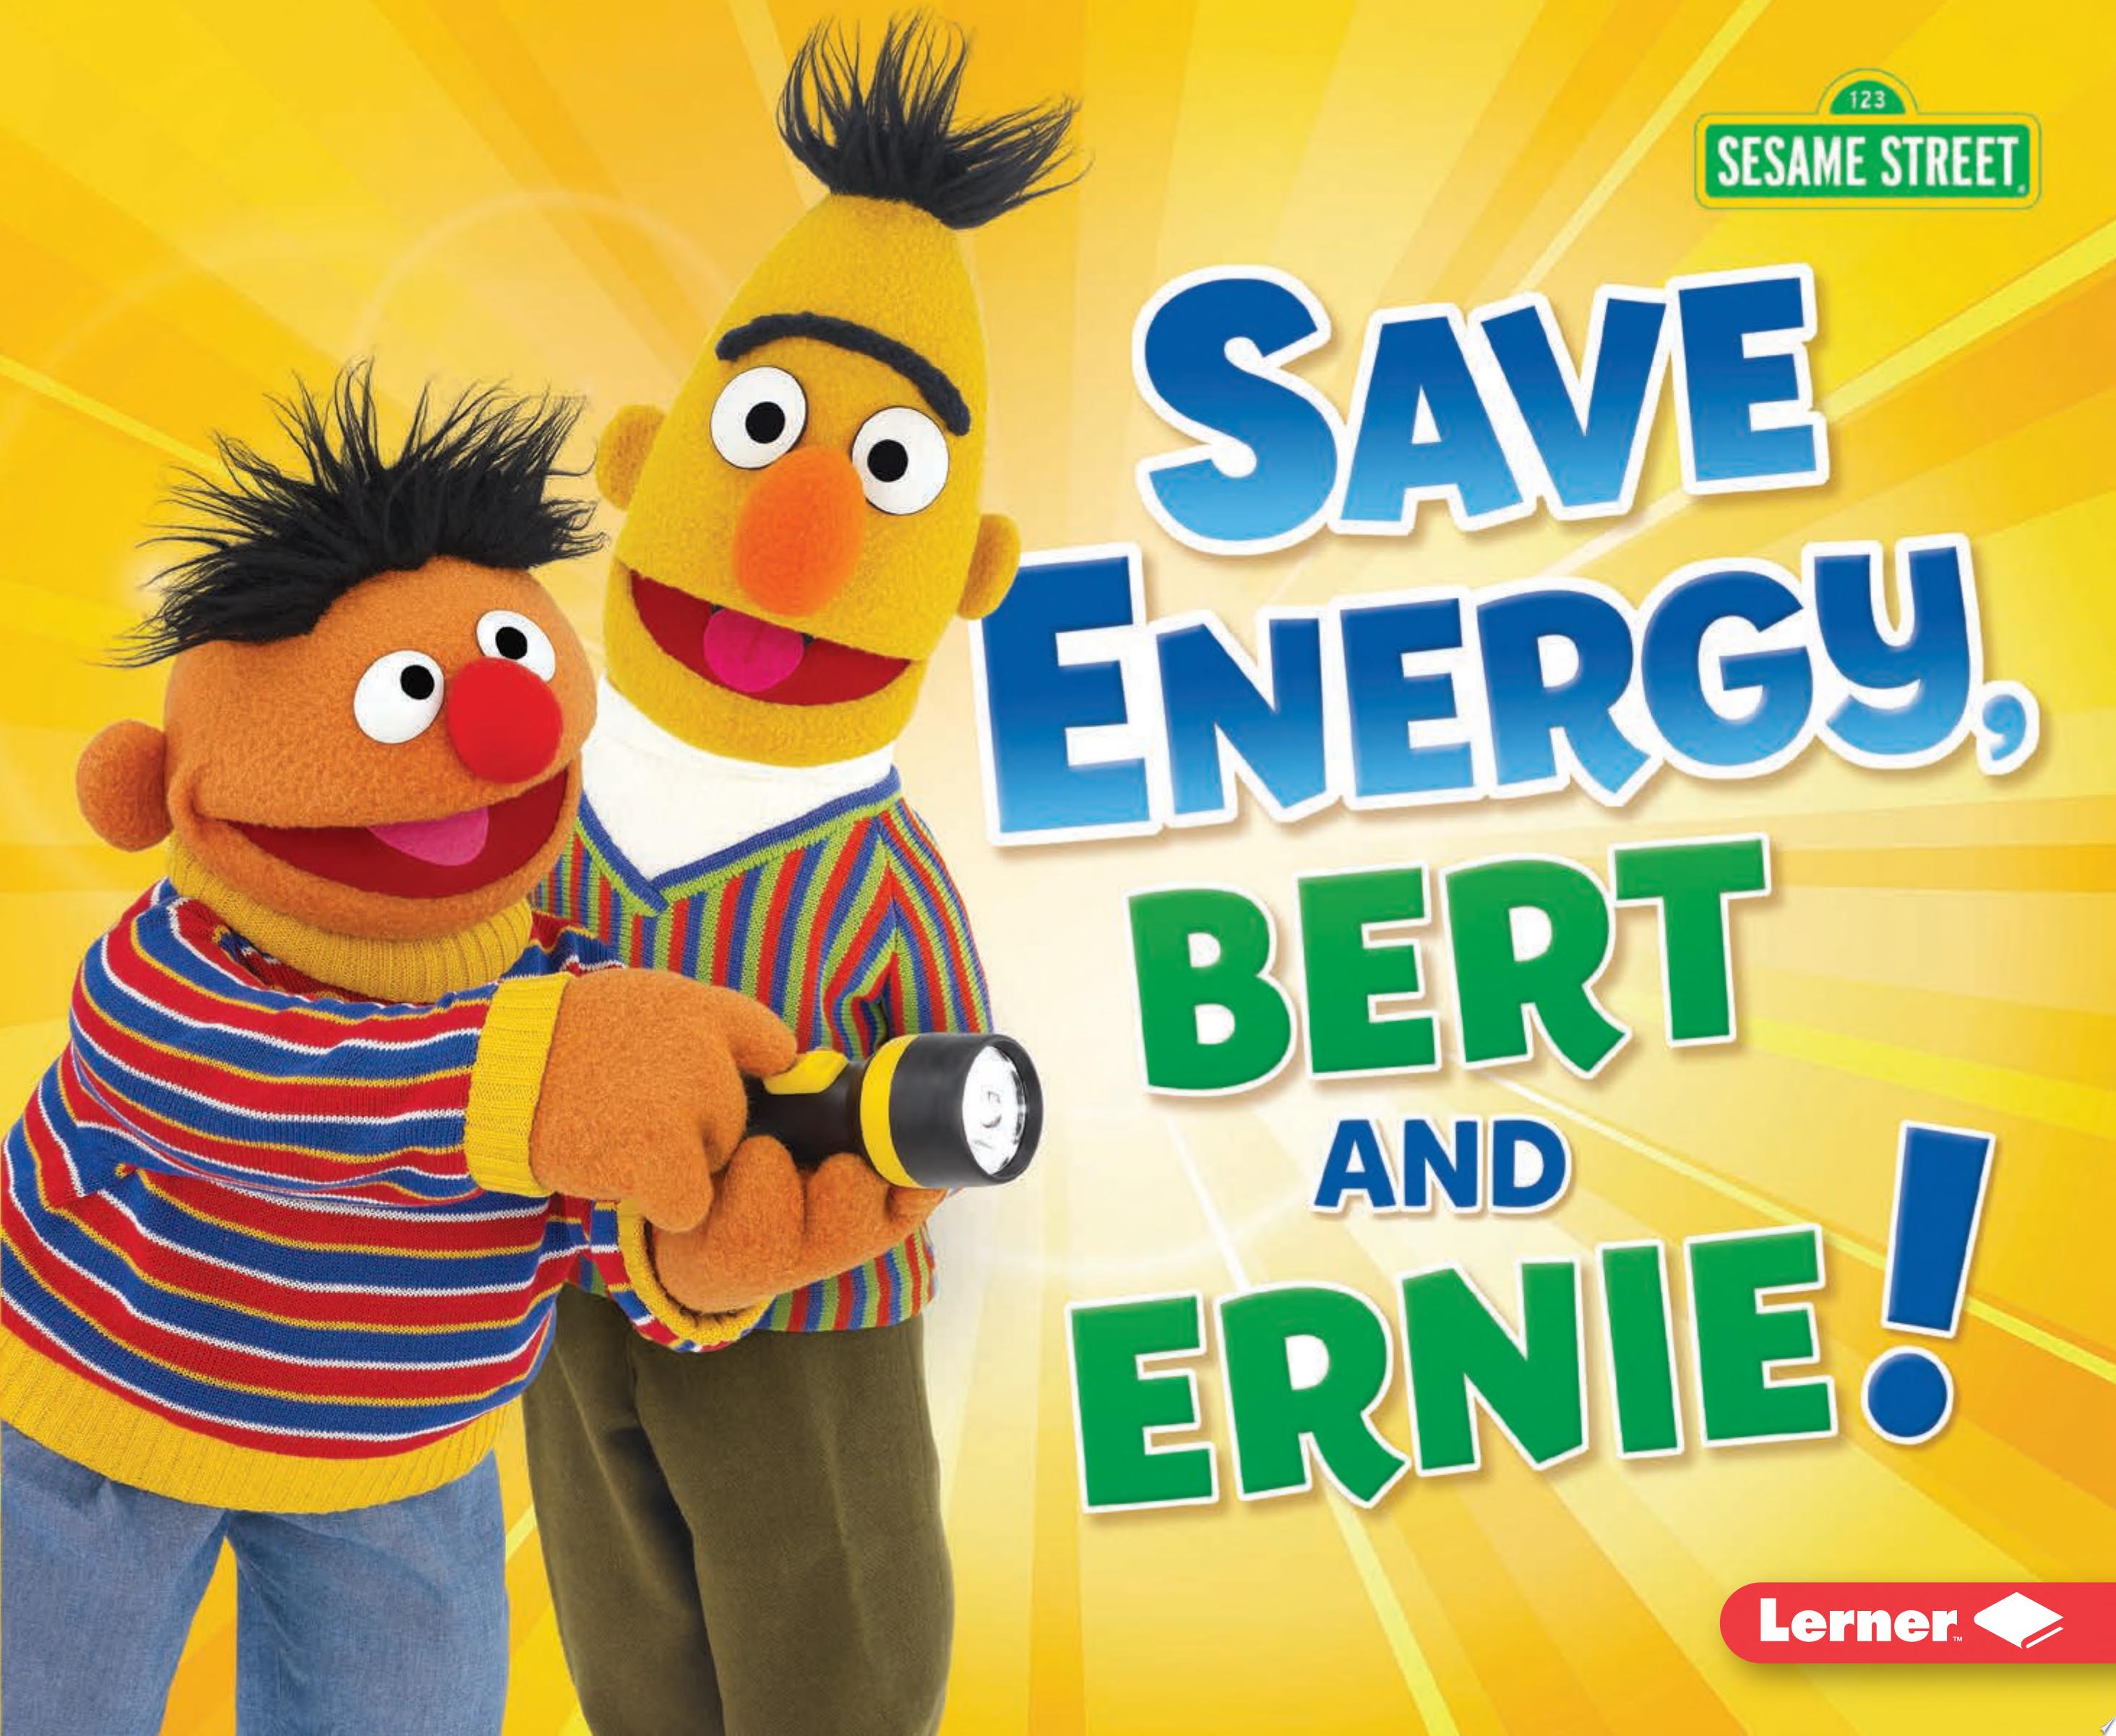 Image for "Save Energy, Bert and Ernie!"